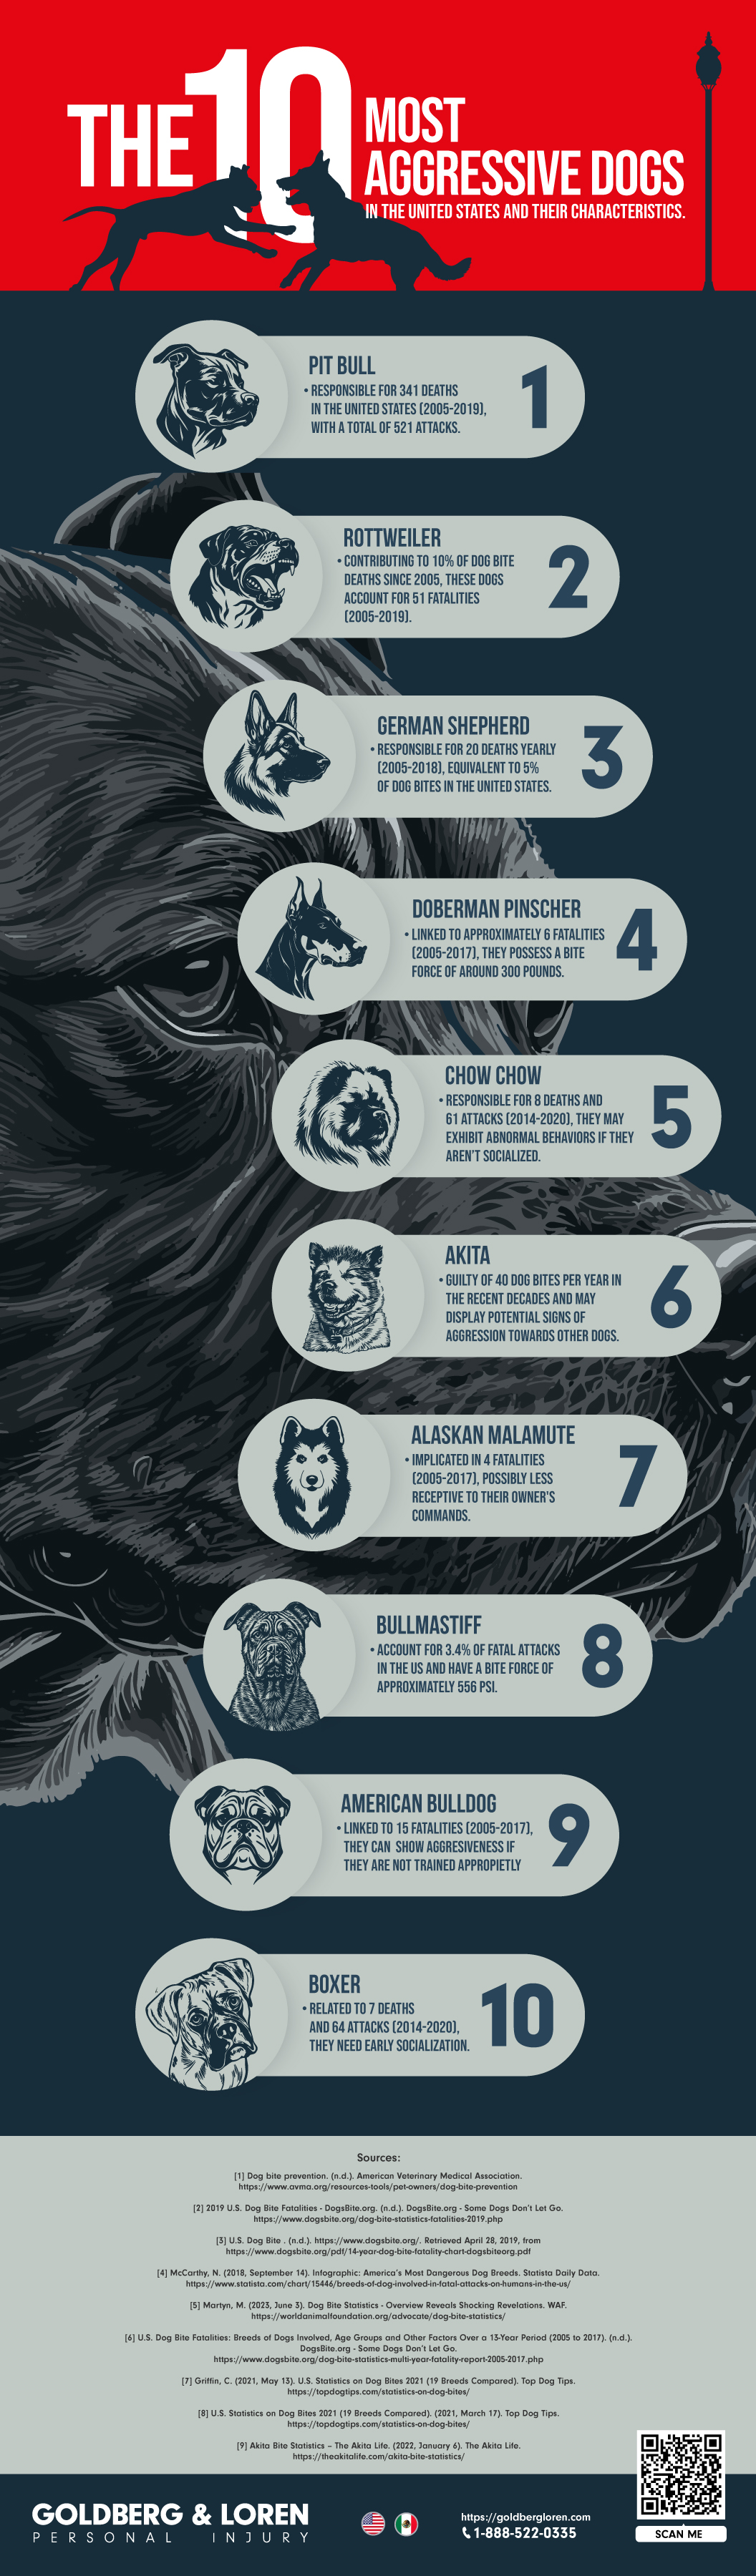 Top 10 Most Aggressive Dogs Infographic